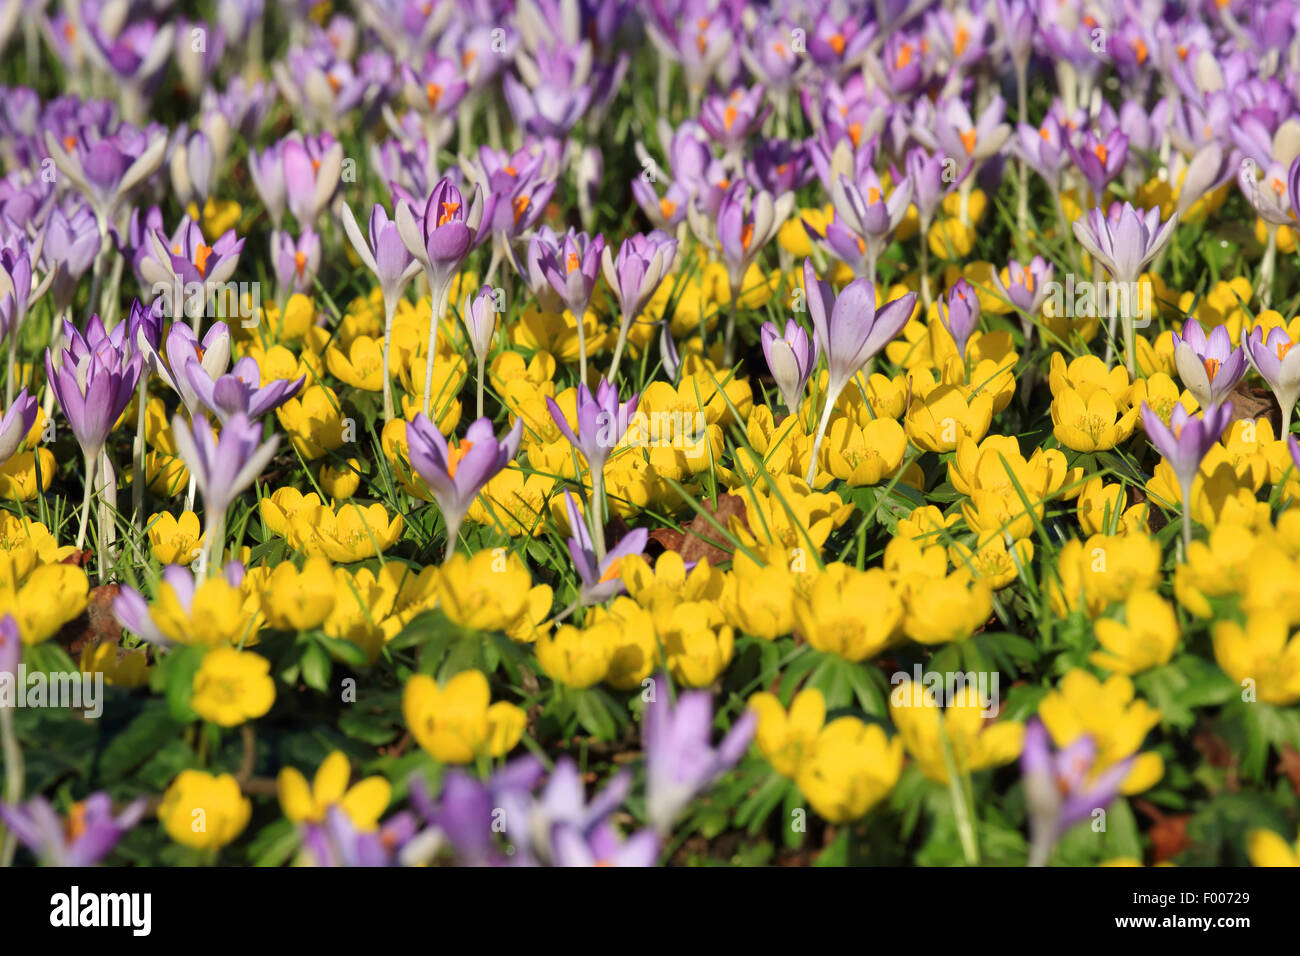 winter aconite (Eranthis hyemalis), with crocuses in a garden, Germany Stock Photo